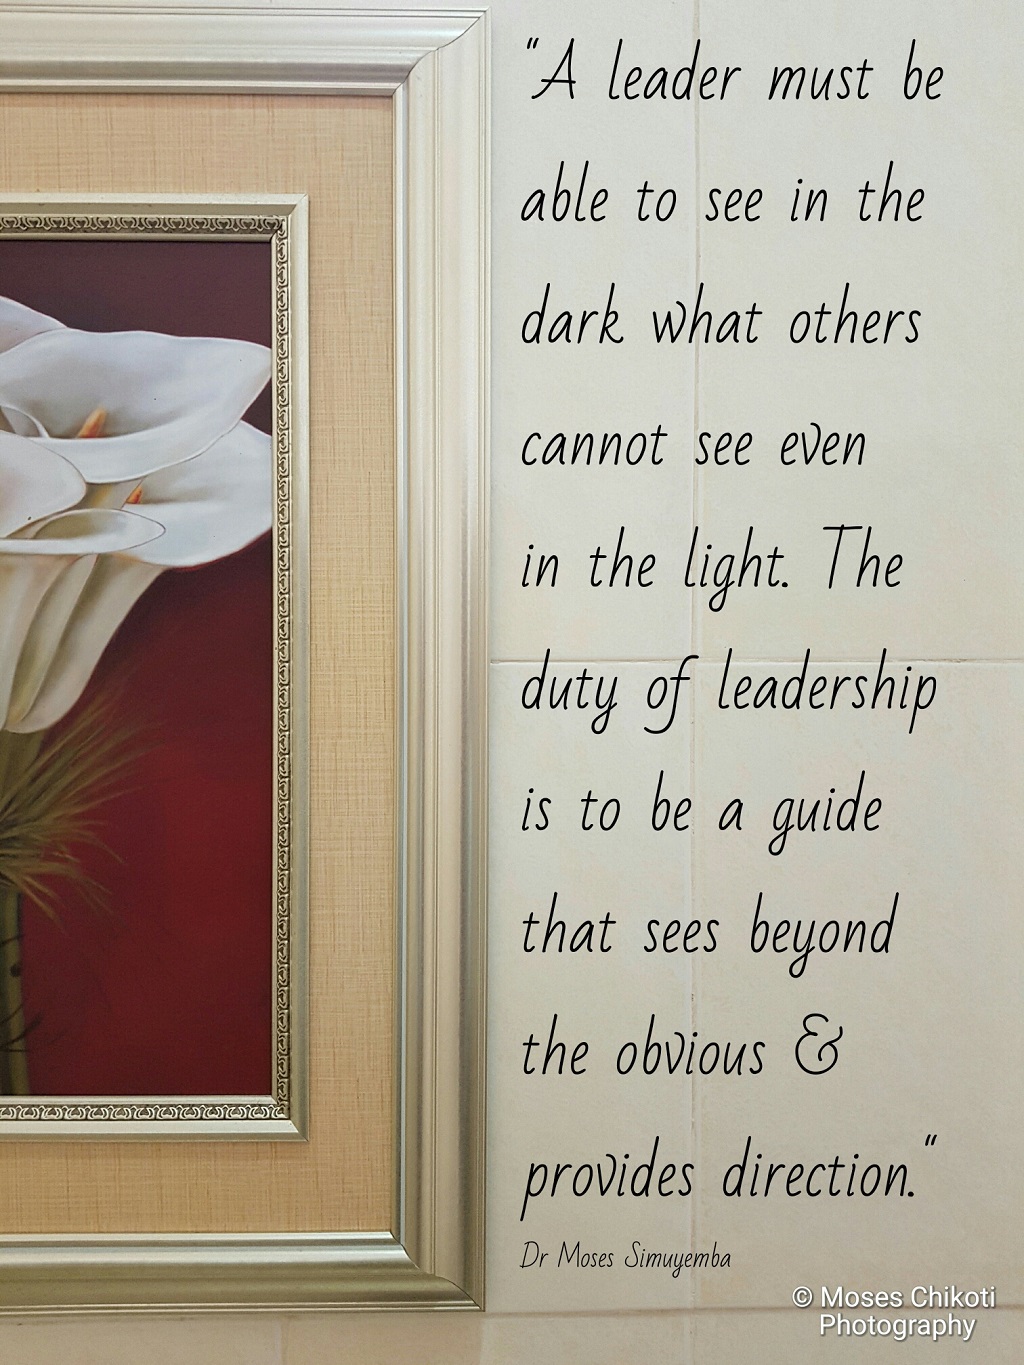 A leader must be able to see in the dark what others cannot see even in the light the duty of leadership is to be a guiude that sees neyond the obvious and provides direction – Dr. Moses Simuyemba